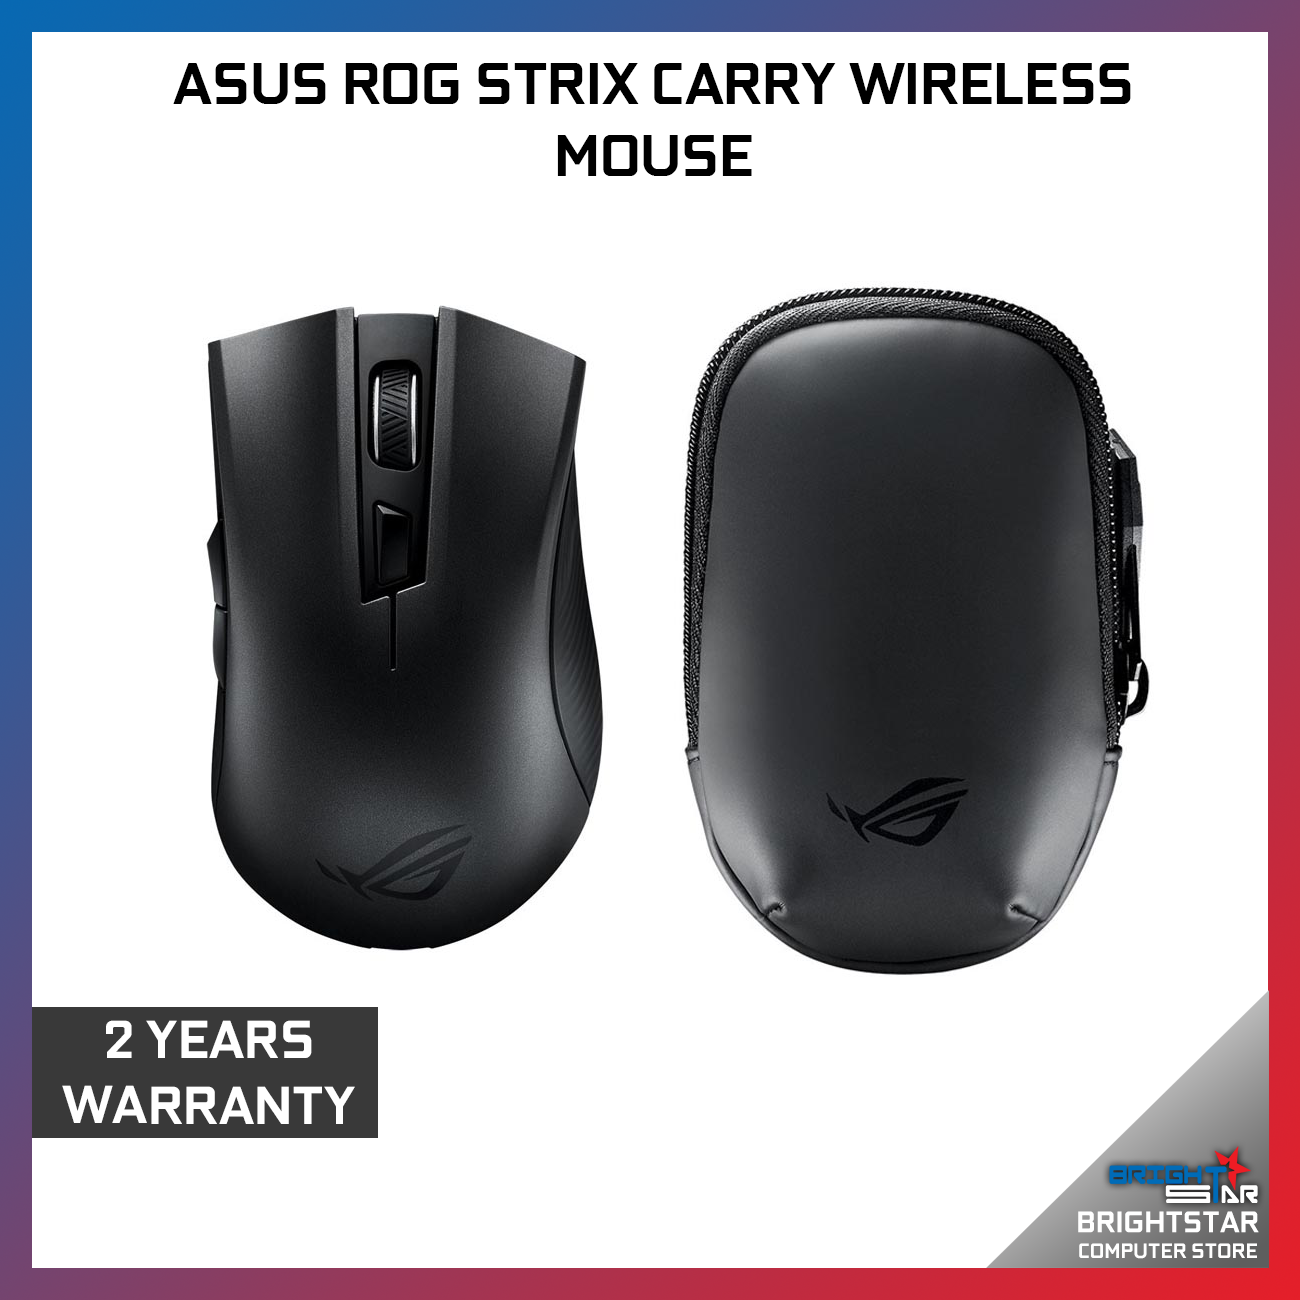 Asus Rog Strix Carry Wireless Gaming Mouse Brightstar Computer